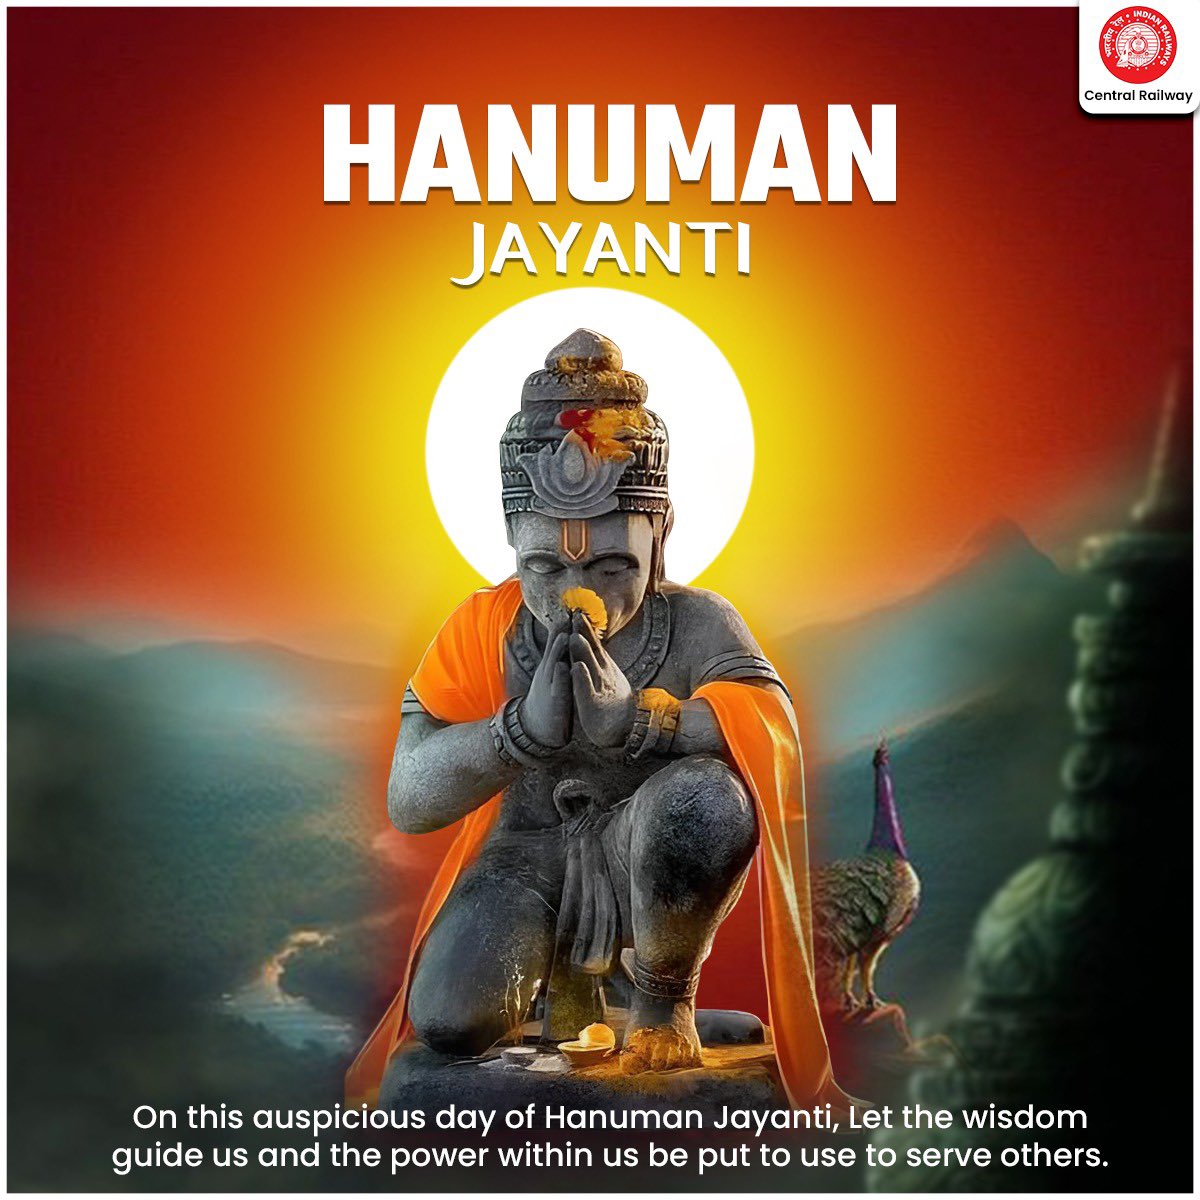 May the divine blessings of Lord Hanuman fill your life with strength, courage, and devotion. Happy Hanuman Jayanti! #HanumanJayanti #CentralRailway